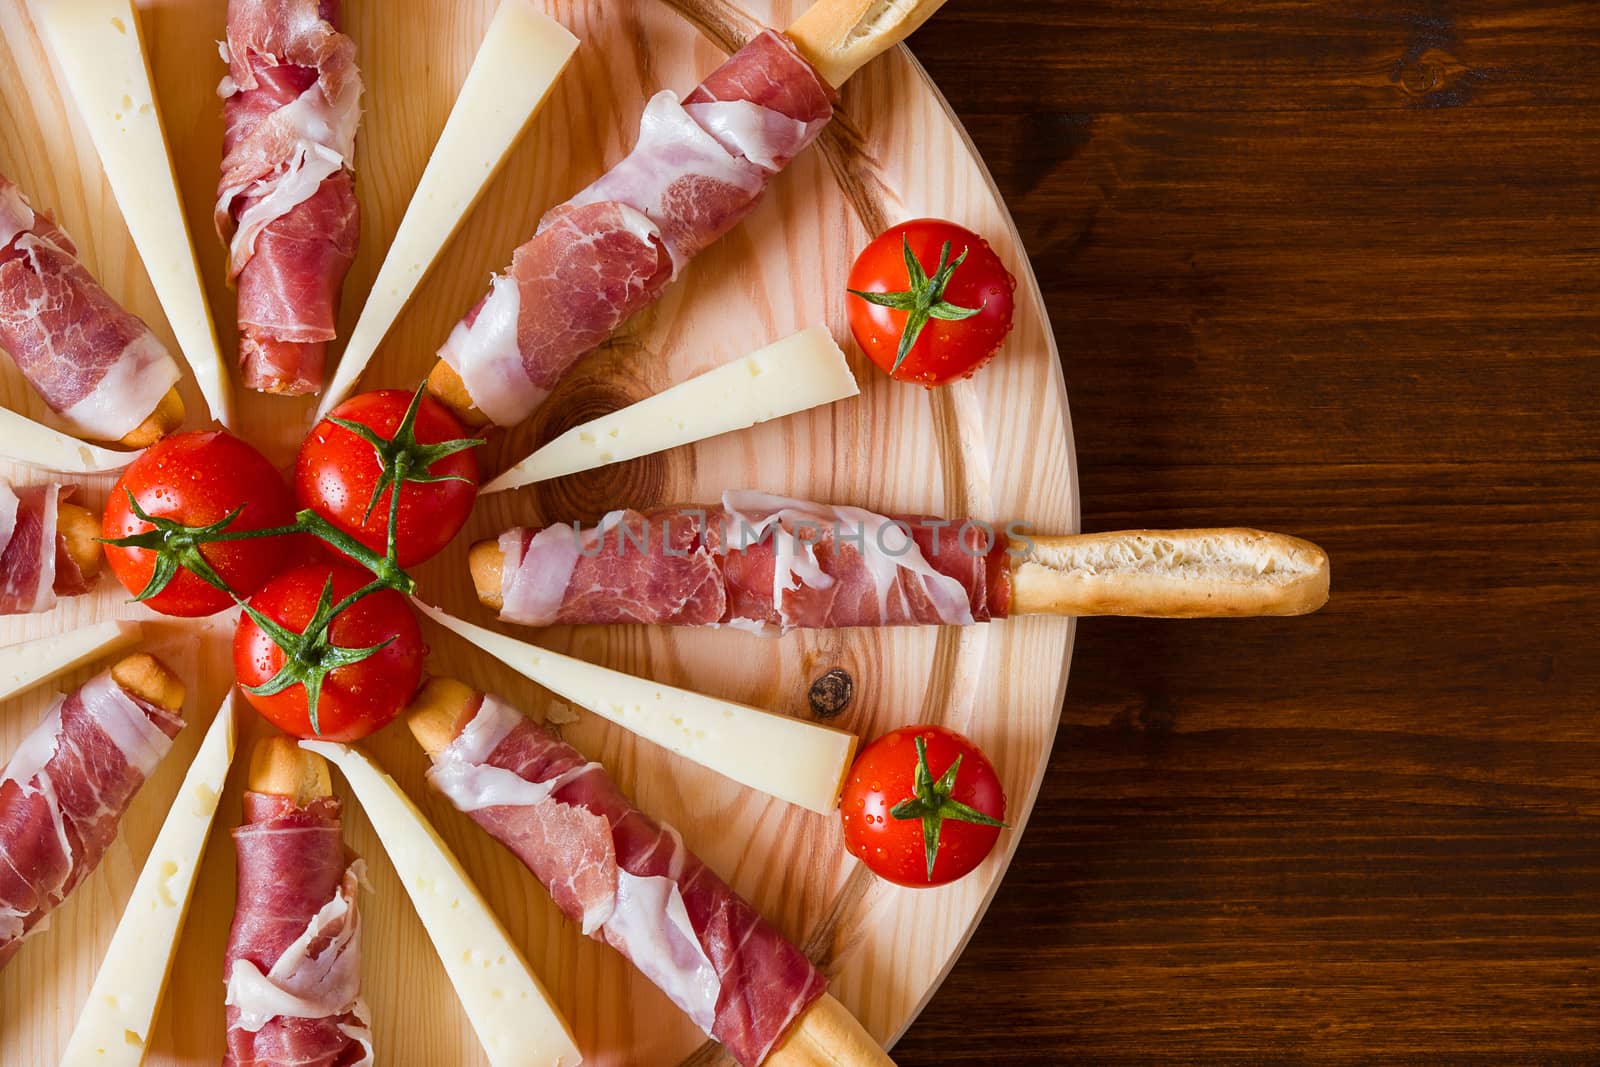 Close up of a typical Italian cutting board seen from above